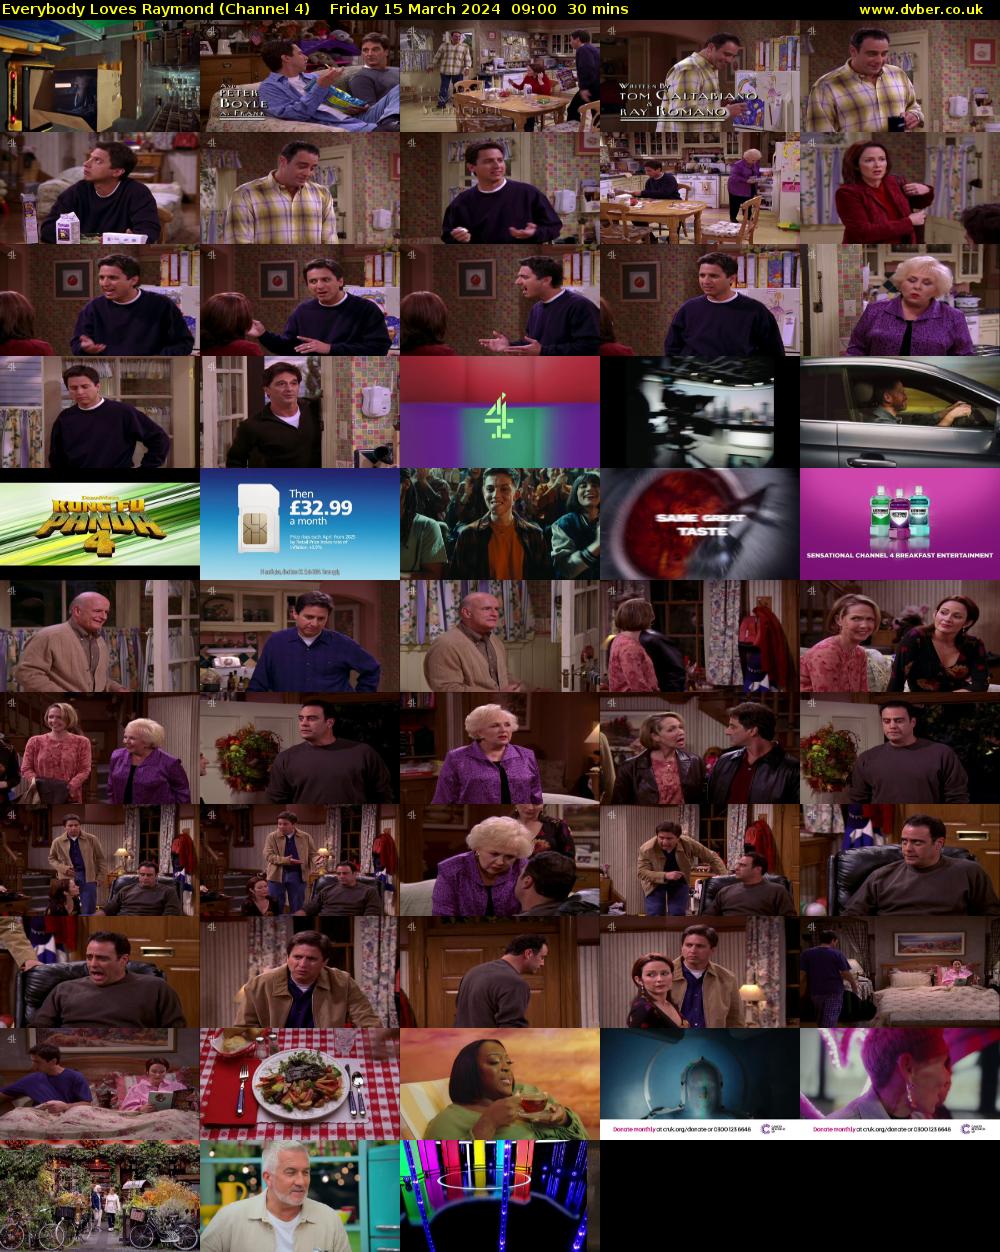 Everybody Loves Raymond (Channel 4) Friday 15 March 2024 09:00 - 09:30